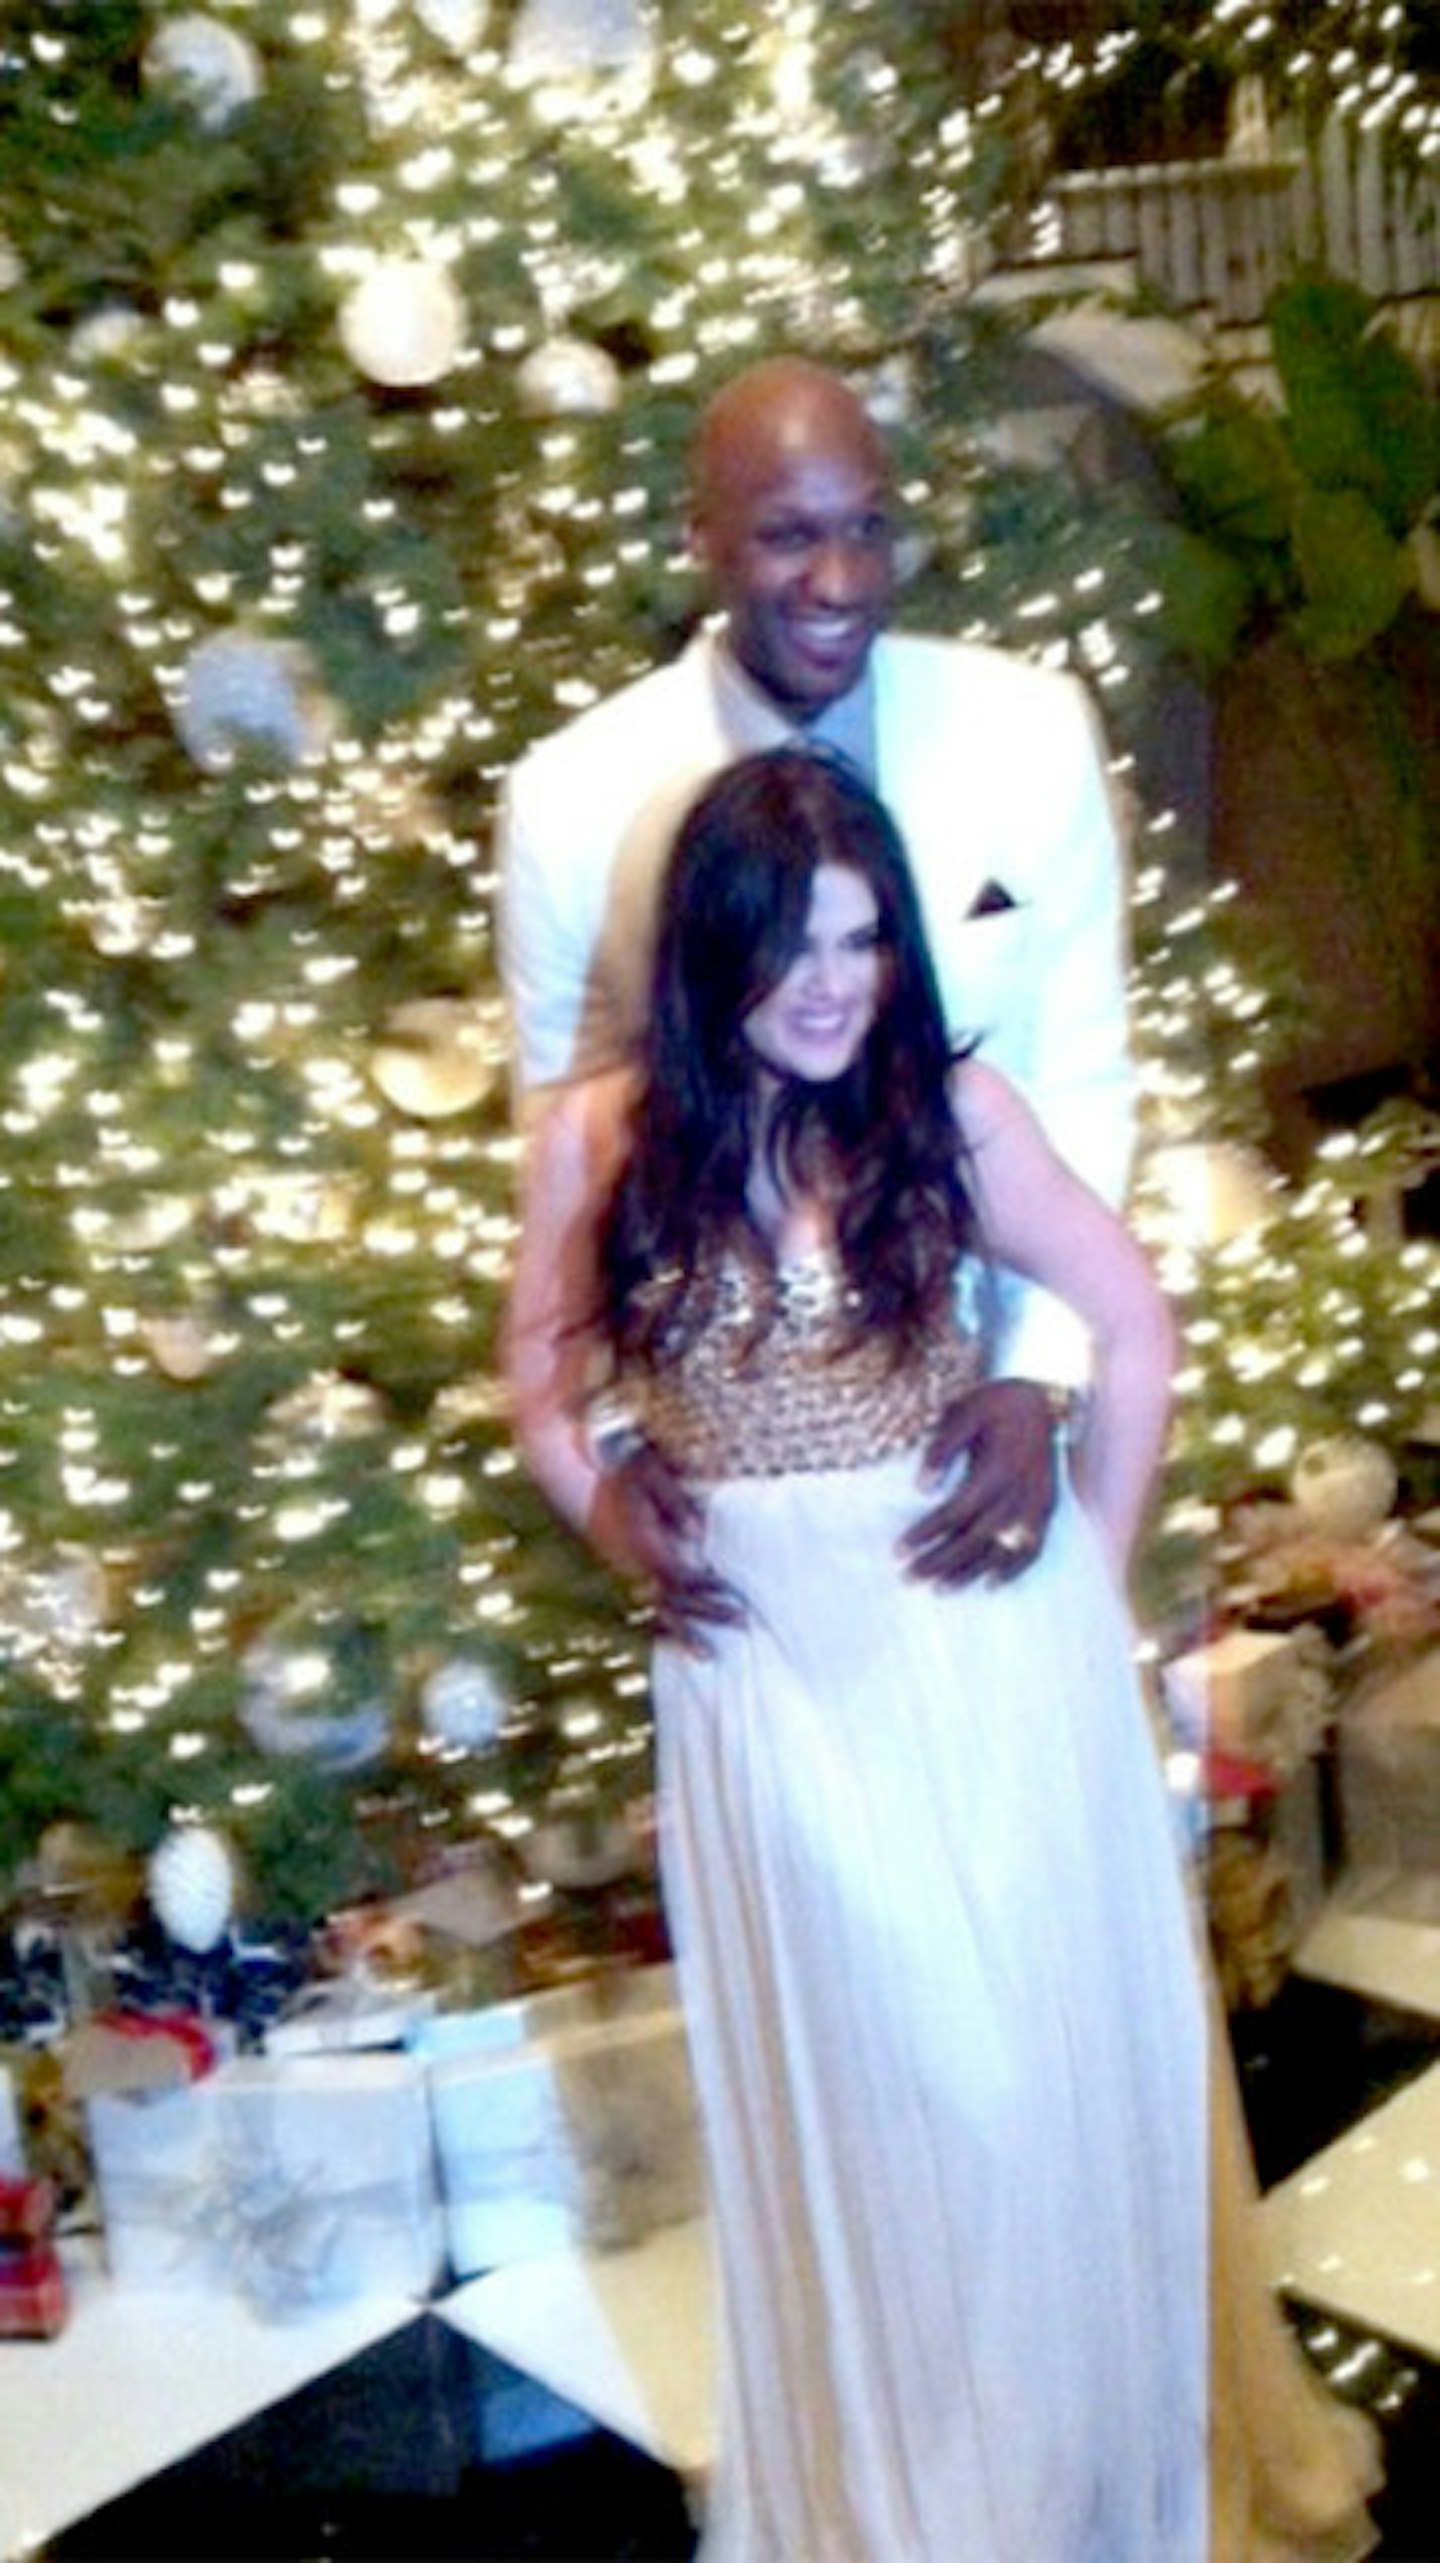 Khloe and Lamar during happier times